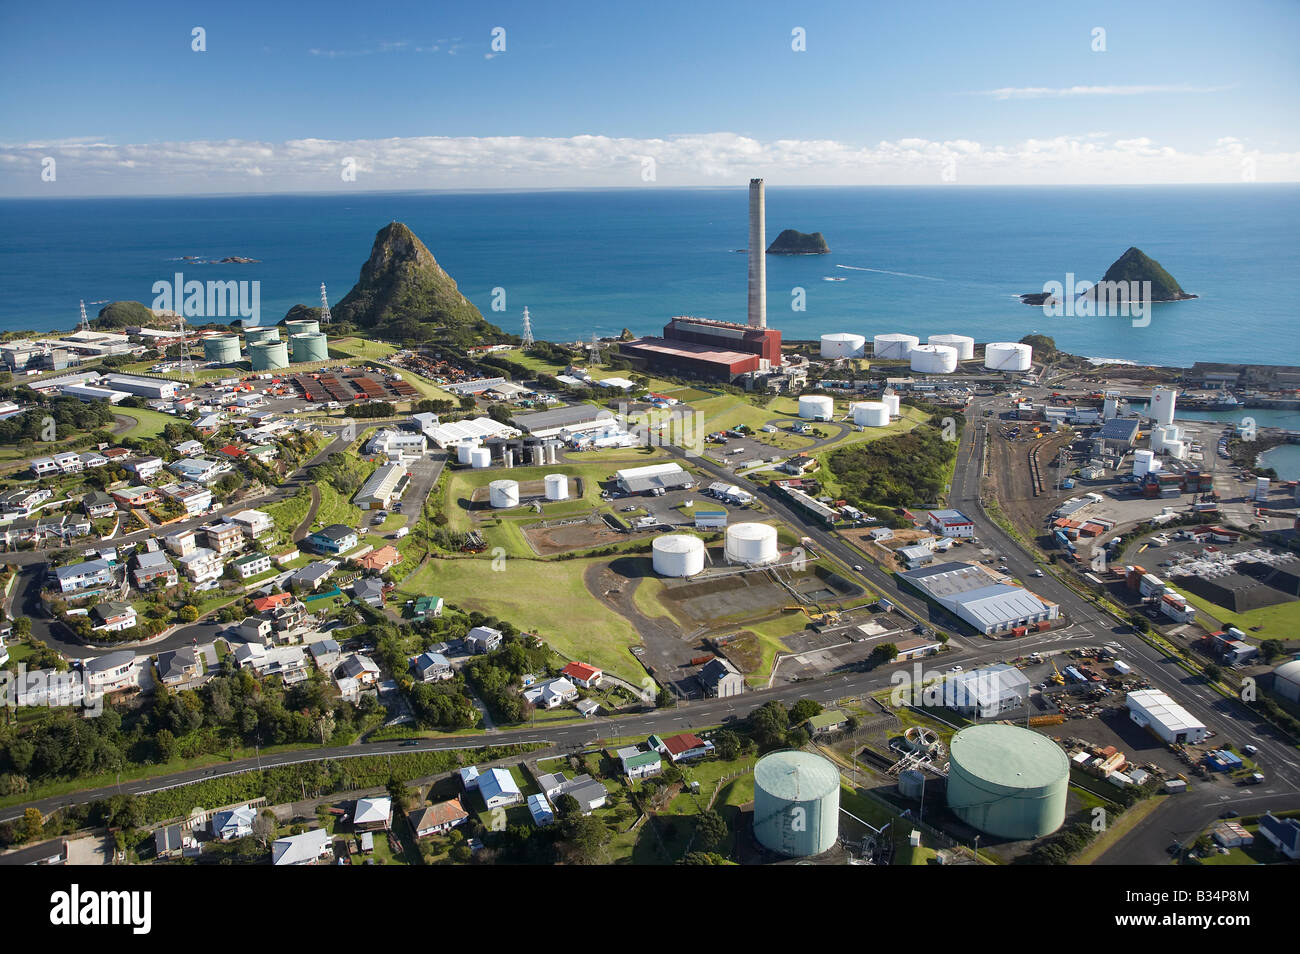 Bulk Fuel Tanks Residential Houses New Plymouth Power Station Paritutu and Sugar Loaf Islands New Plymouth Taranaki New Zealand Stock Photo